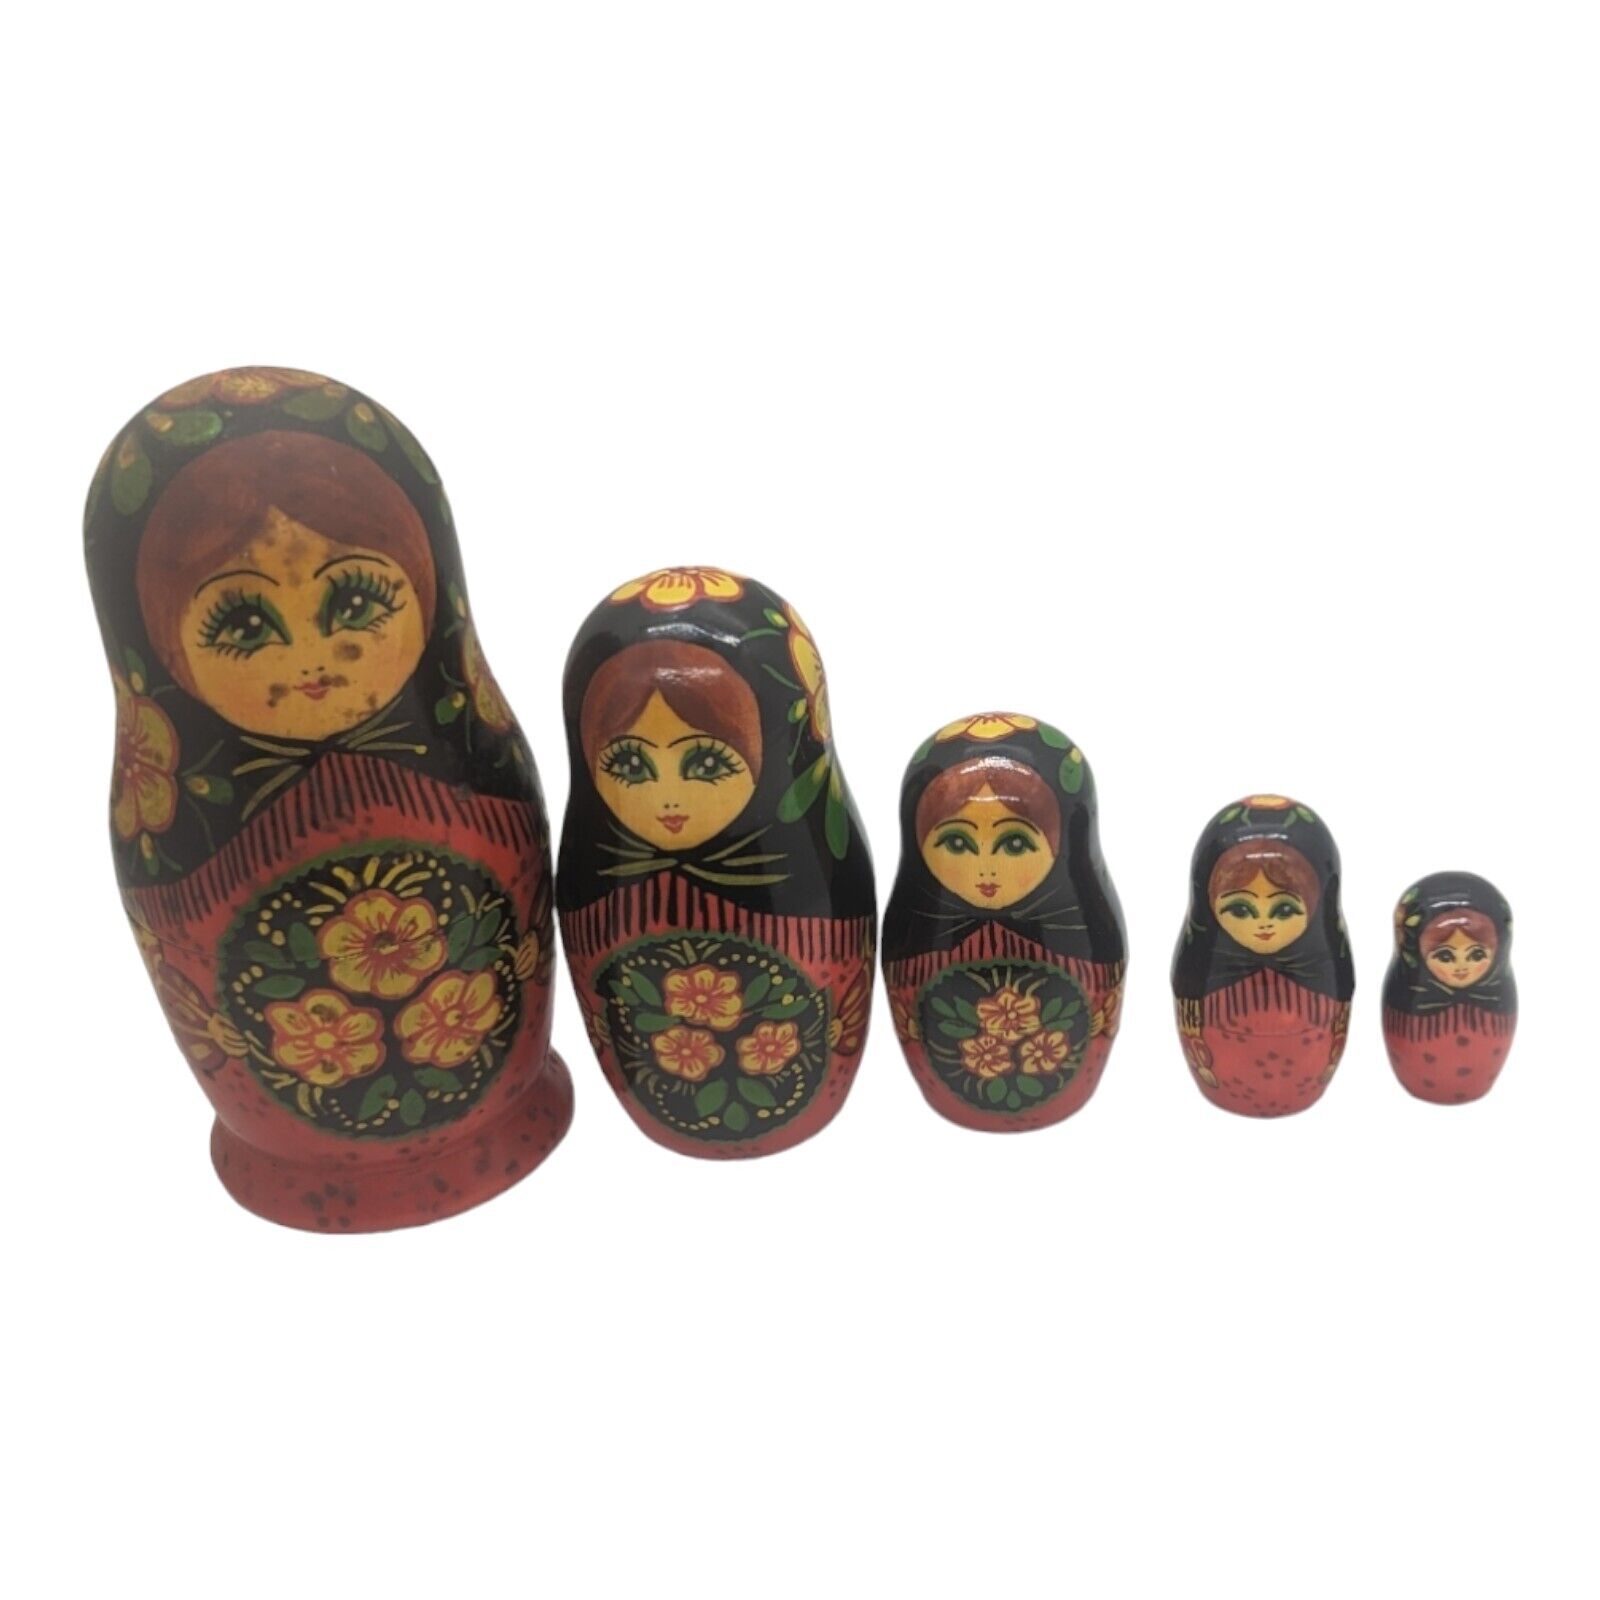 Vintage Hand Painted Wooden Russian Nesting Stacking Dolls Set of 5